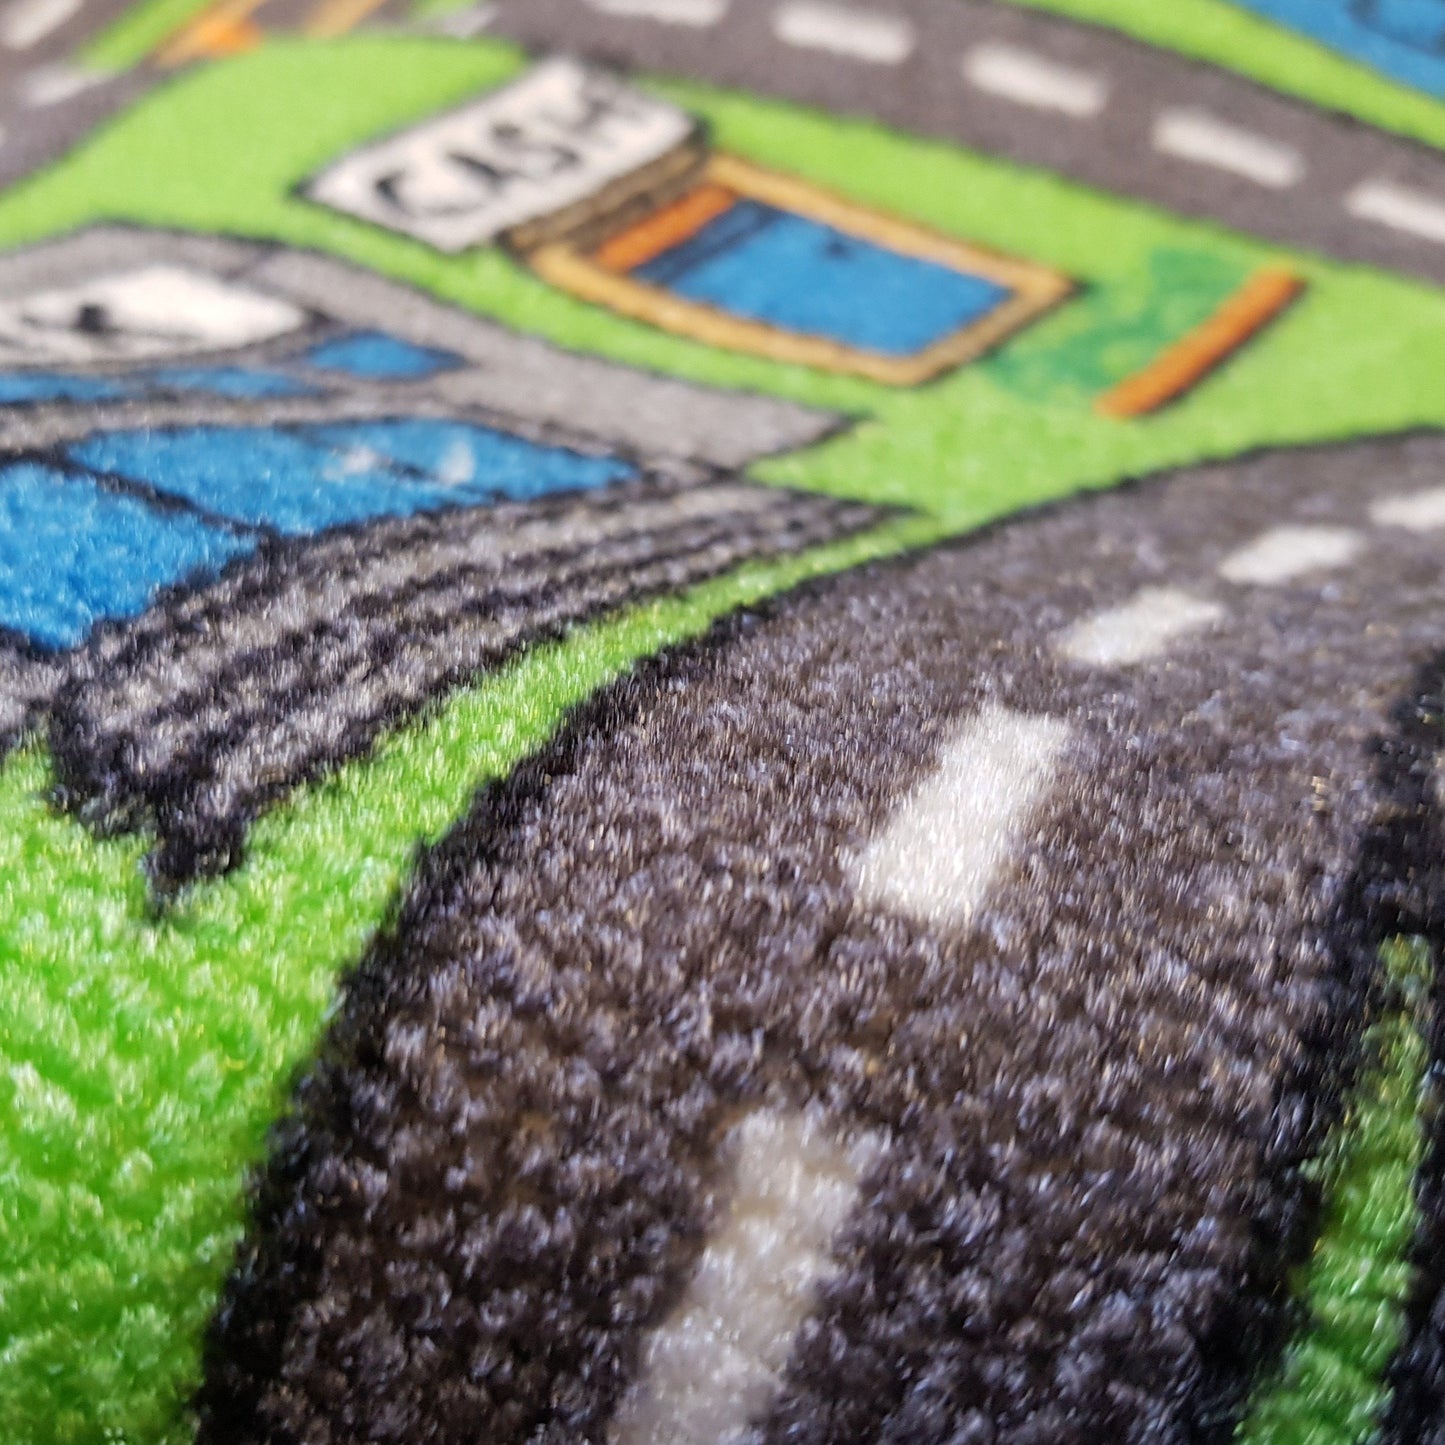 Suburb Kids Car Rug in Size 110cm x 160cm-Rugs 4 Less